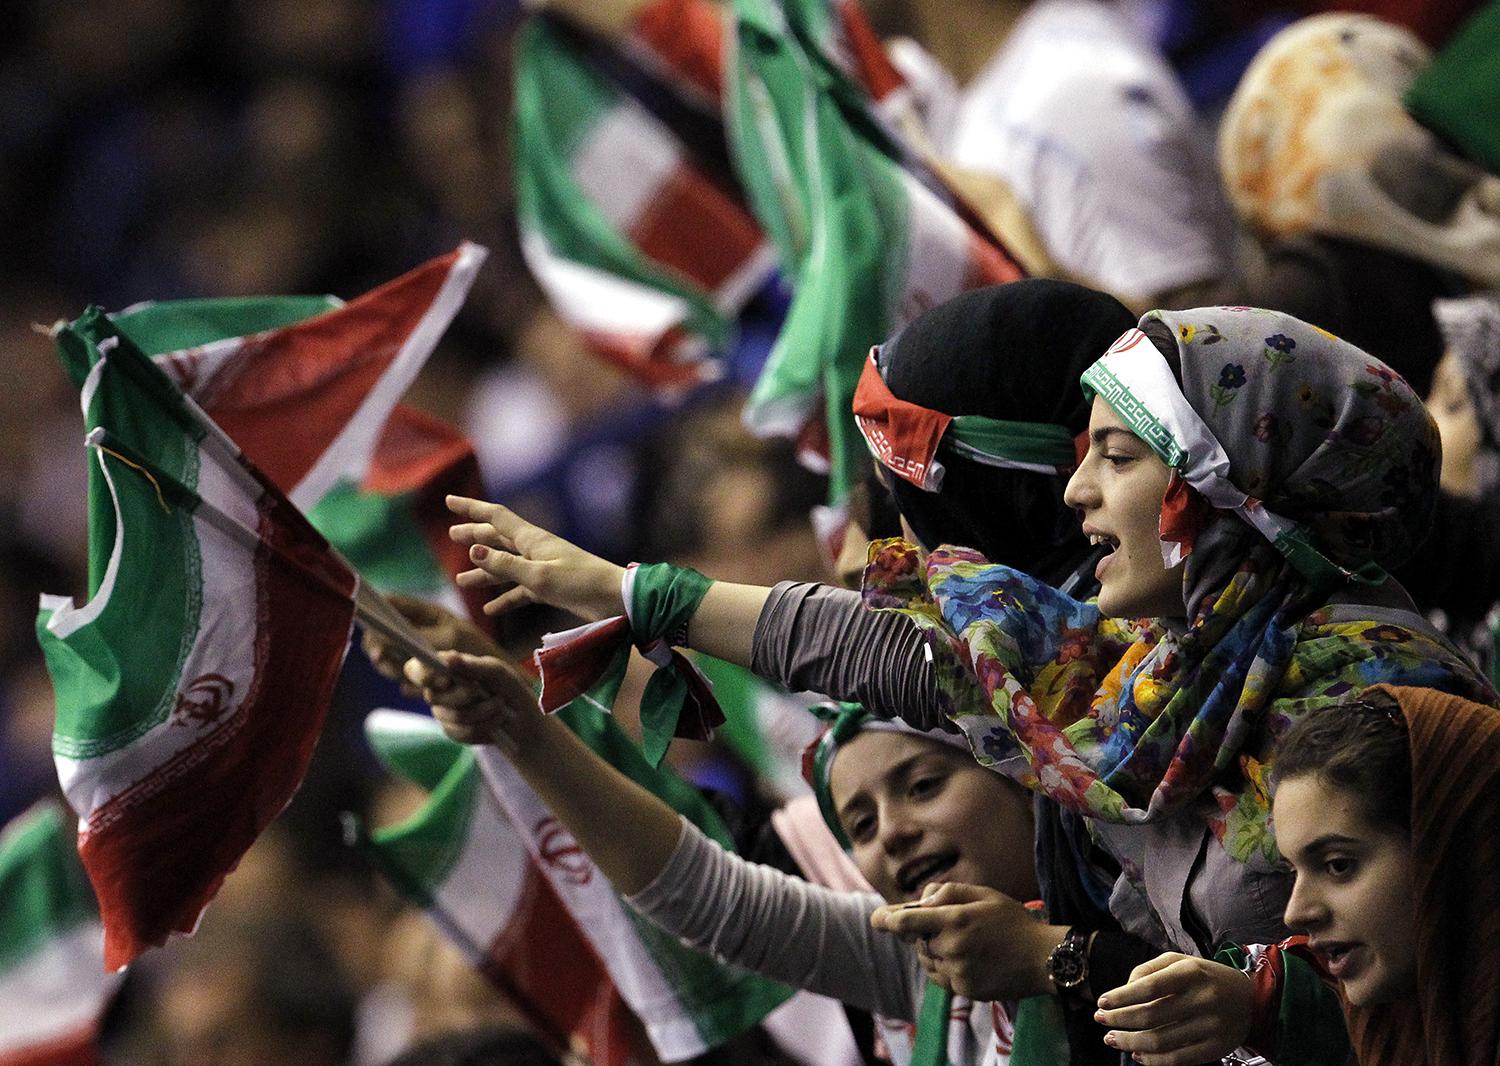 Iran's supporters shout during the FIVB Men's Volleyball World Championship first round match between Iran and Italy in Milan September 27, 2010.  © 2010 Reuters